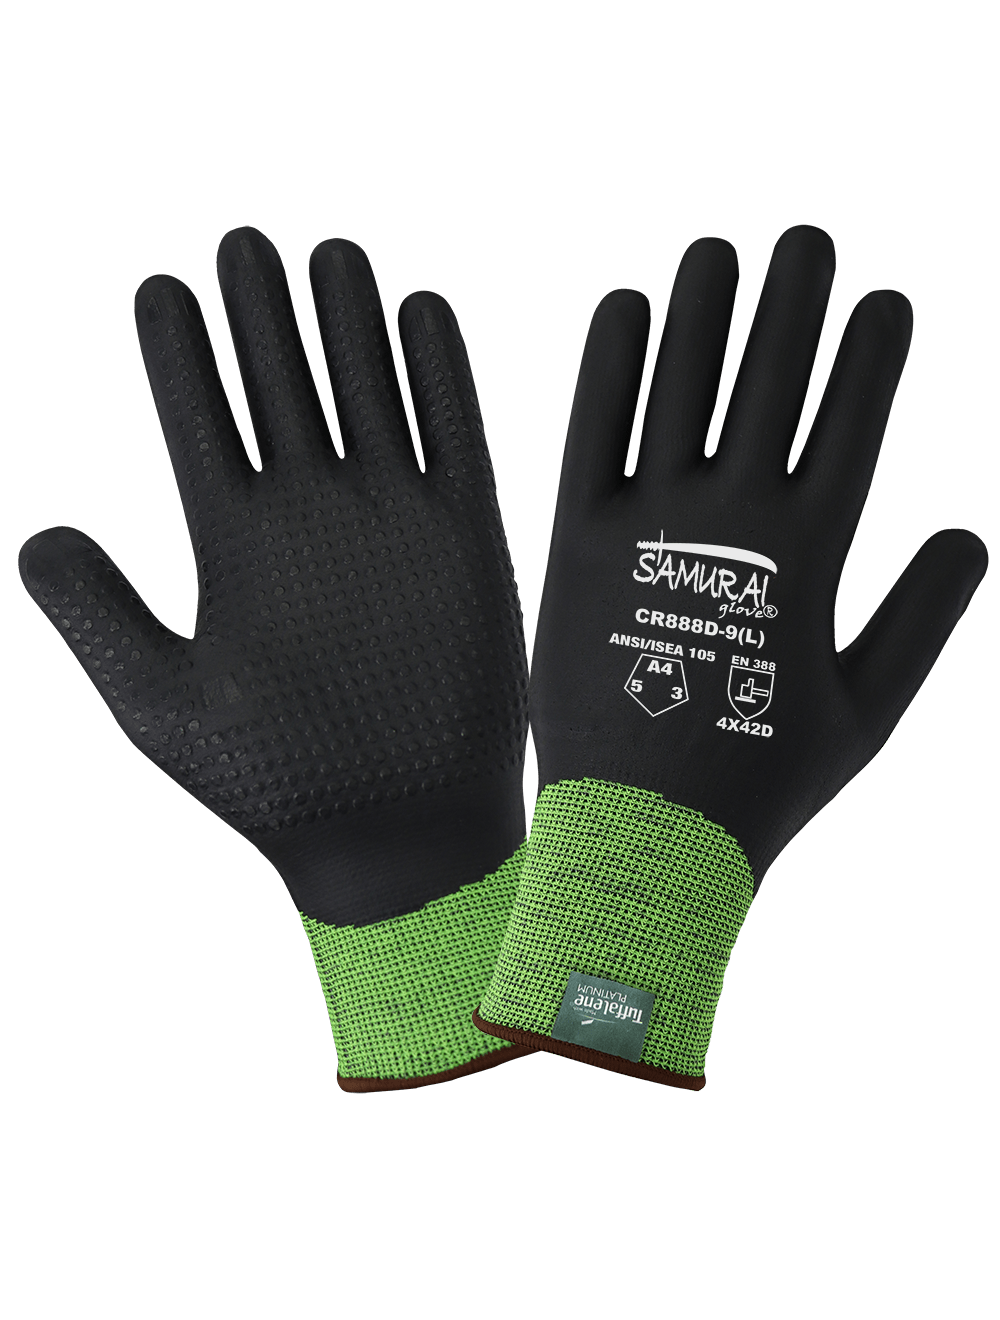 Samurai Glove® High-Visibility Cut Resistant Fully Coated Gloves Made with 18-Gauge Tuffalene® Platinum - CR888D